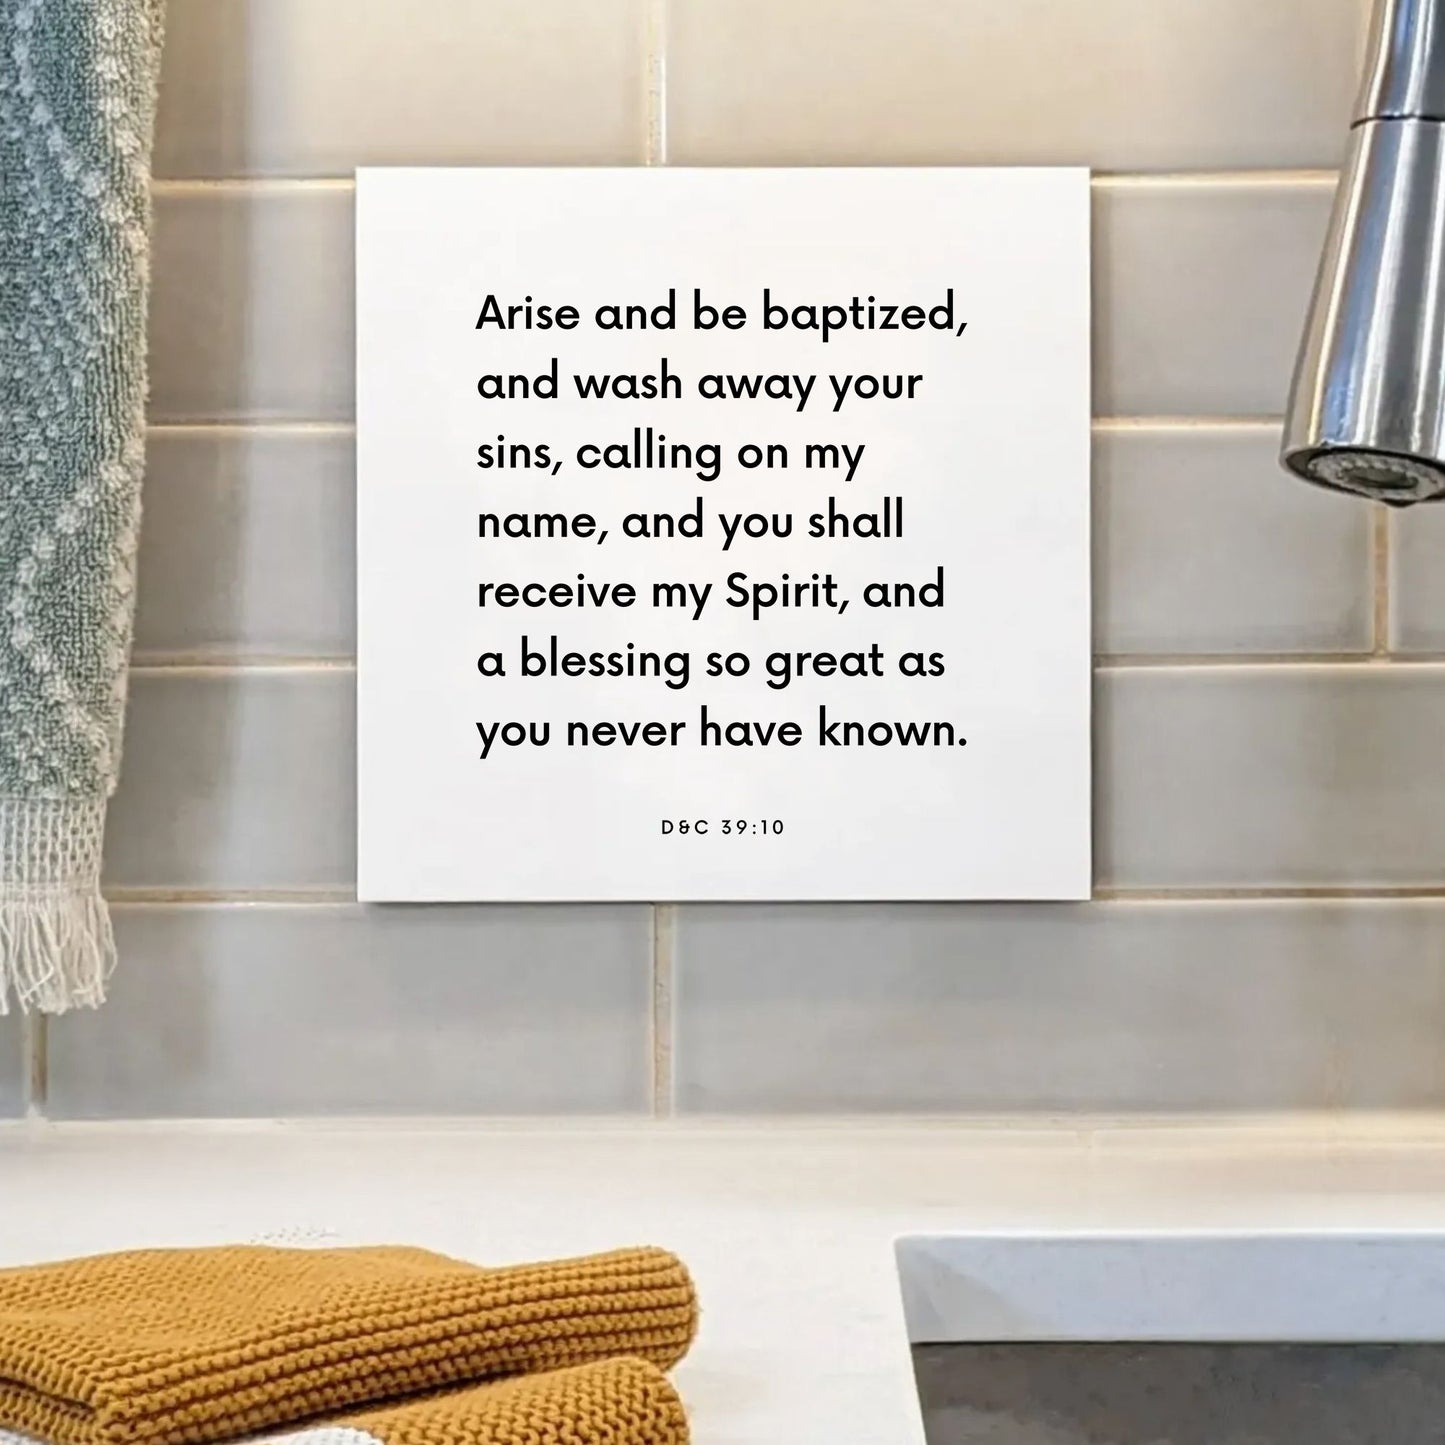 Sink mouting of the scripture tile for D&C 39:10 - "Arise and be baptized, and wash away your sins"